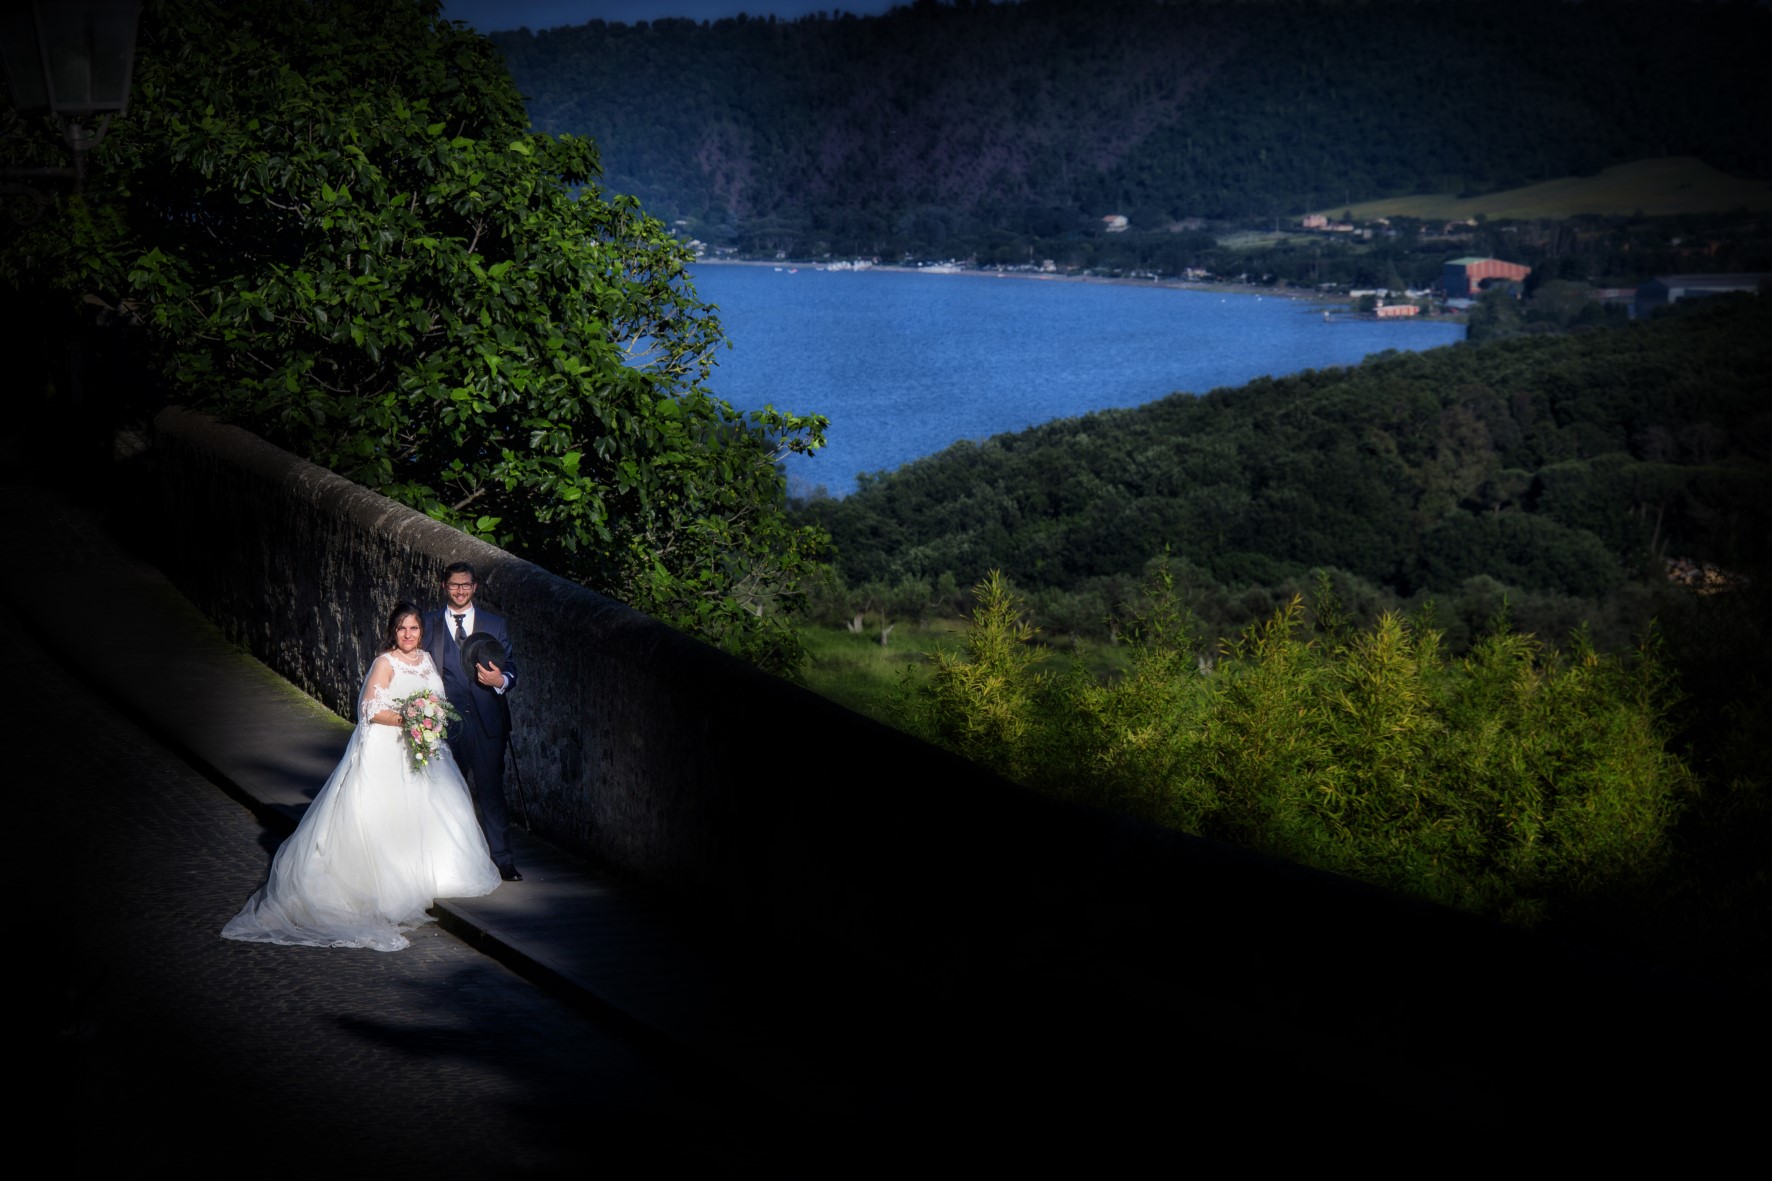 Photography & Project by fototrogu.com